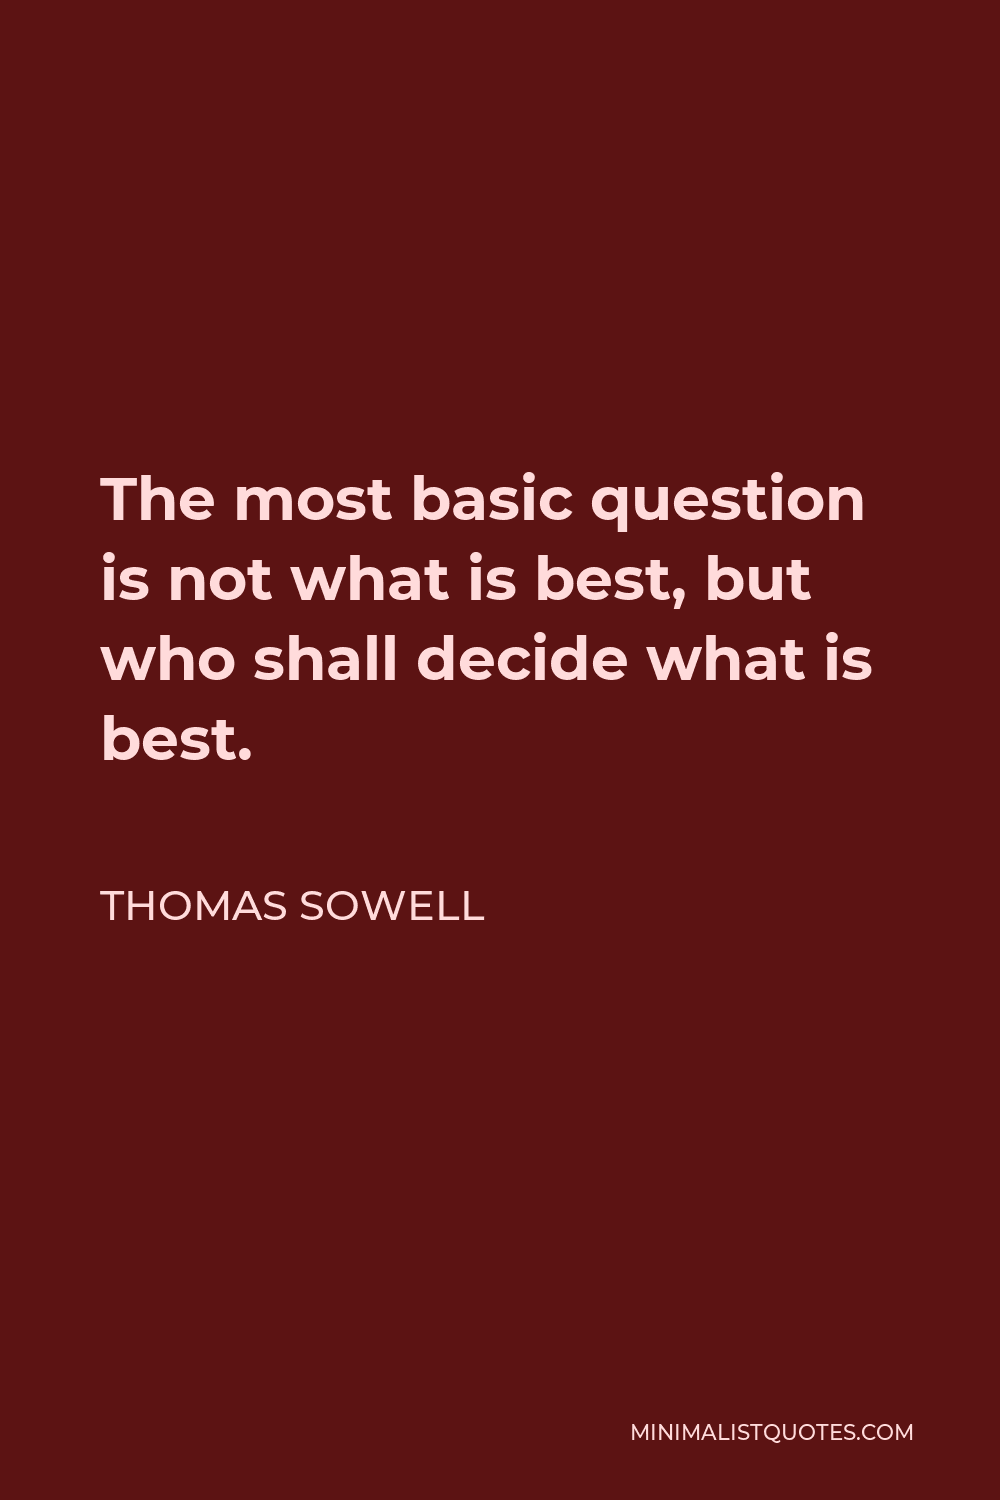 Thomas Sowell Quote - The most basic question is not what is best, but who shall decide what is best.